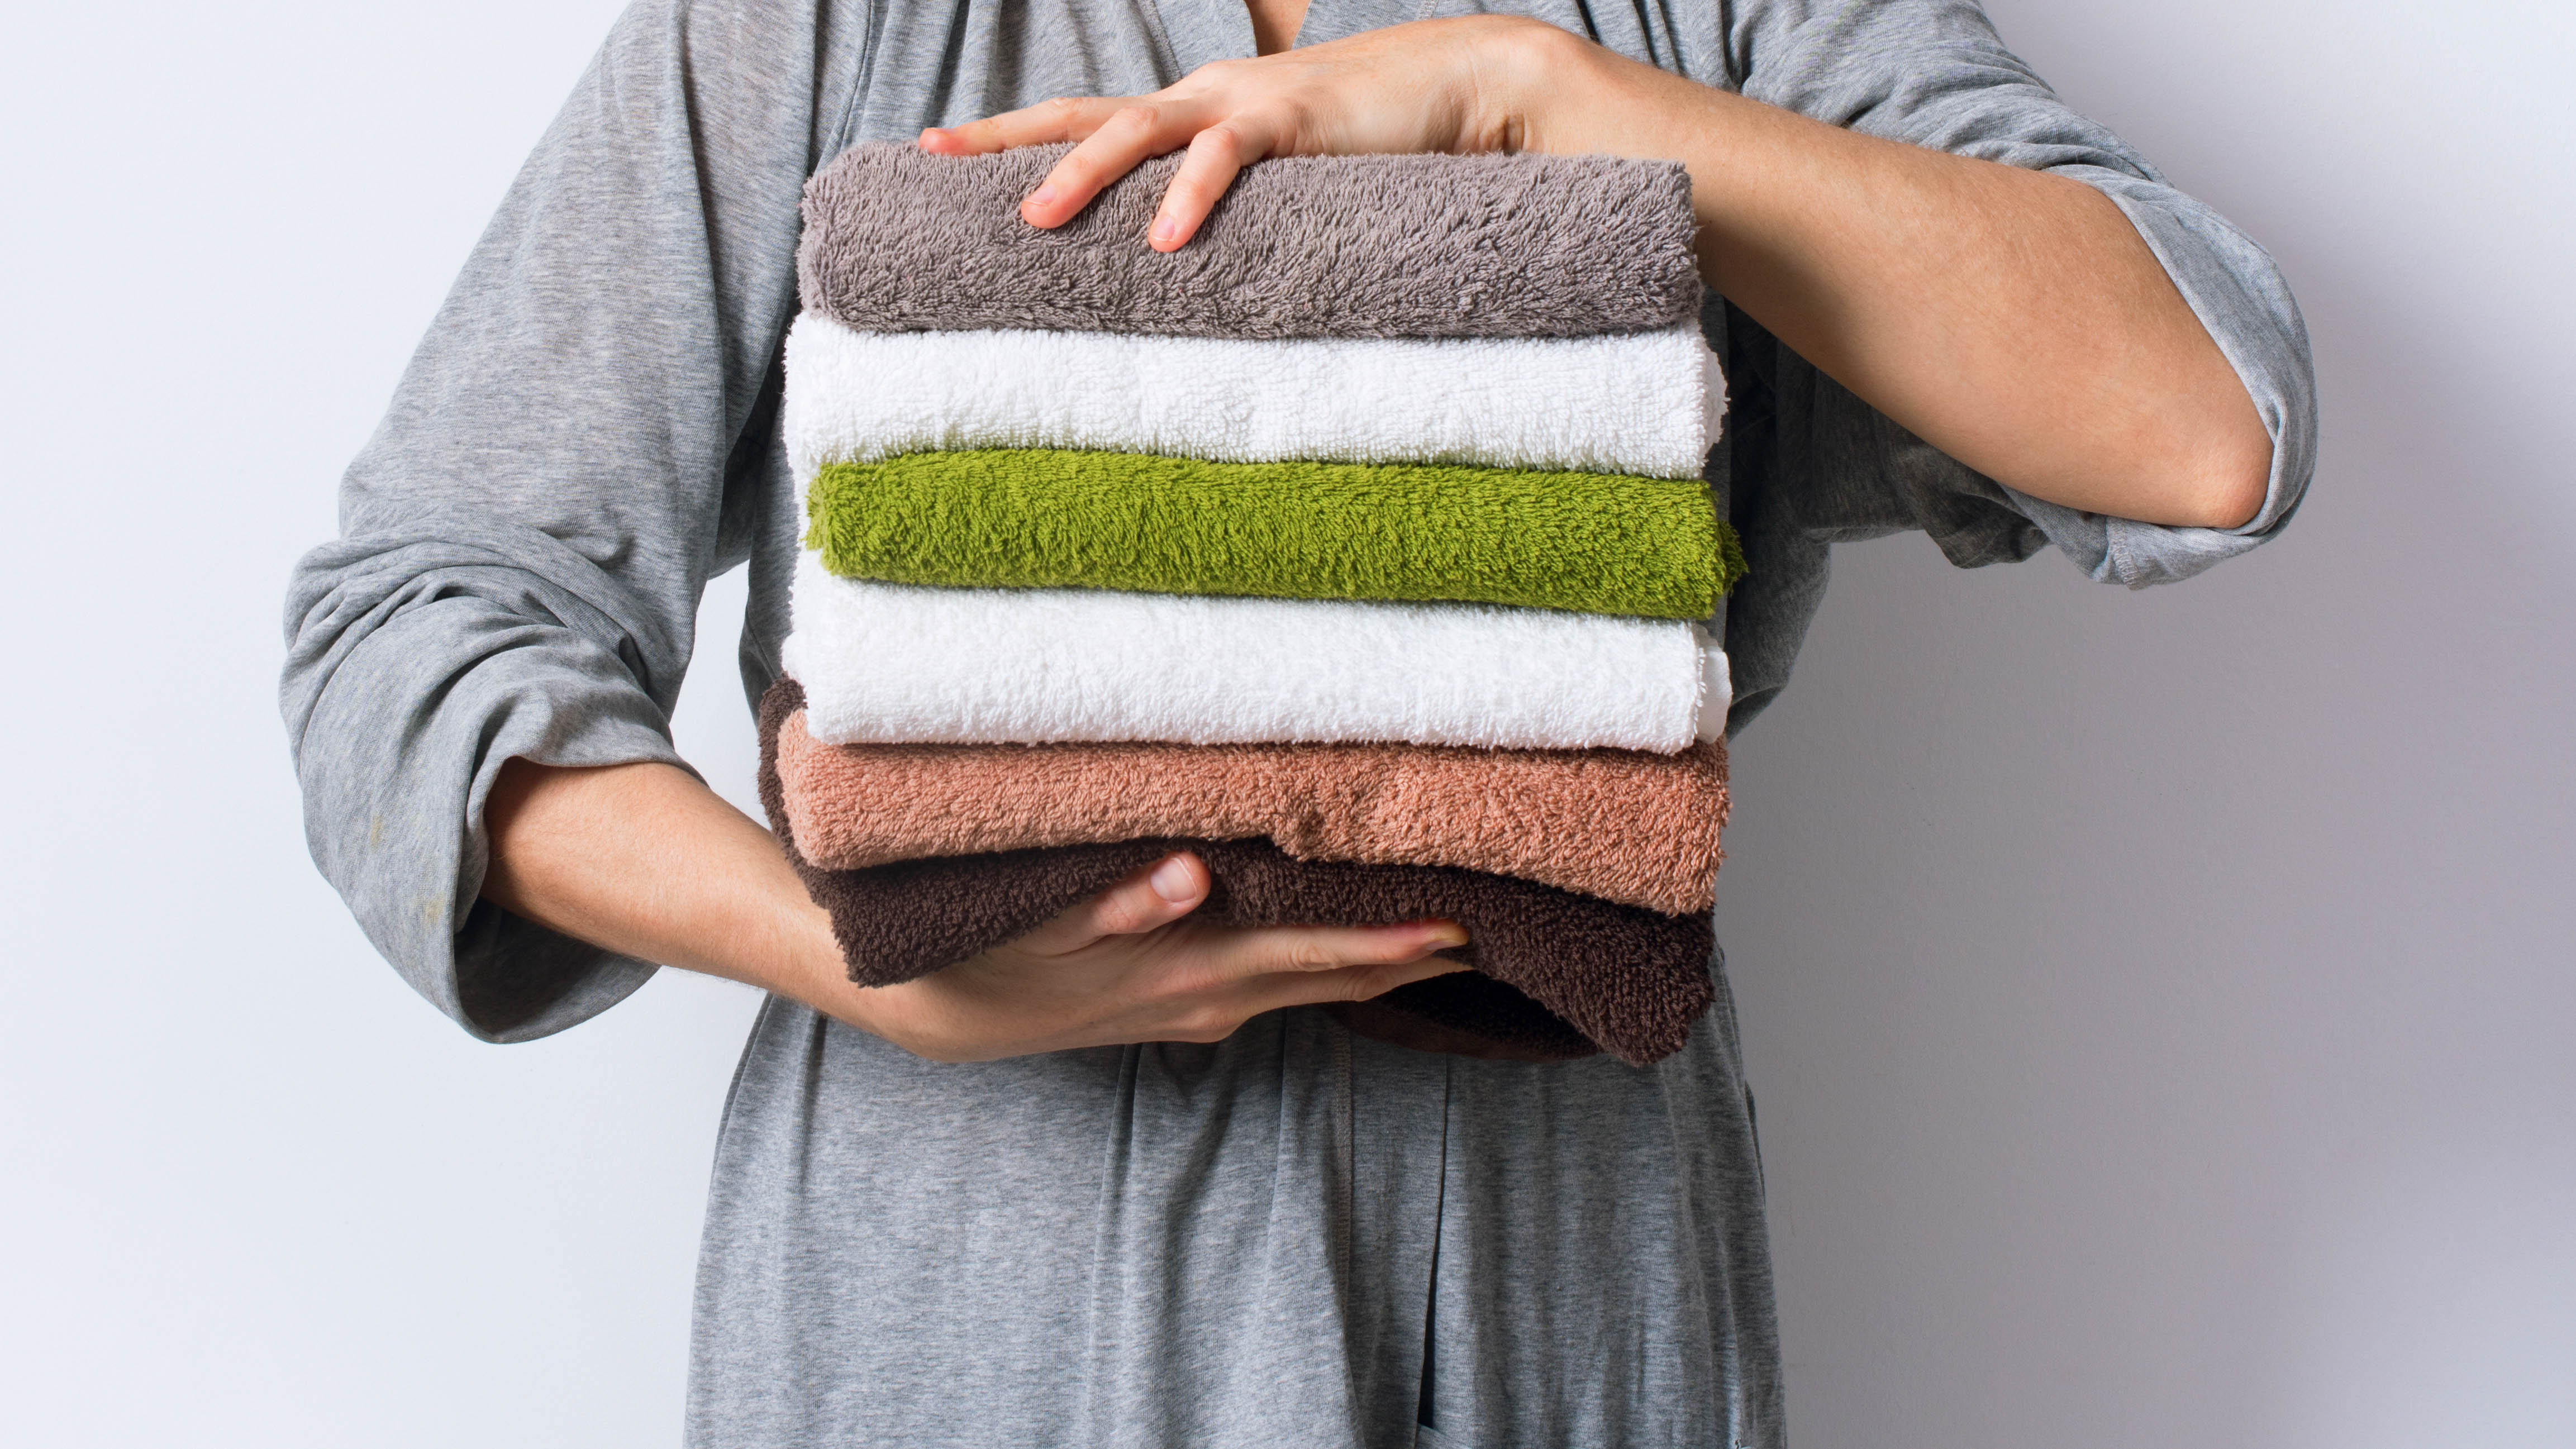 How to wash towels and keep them fluffy | Tom's Guide